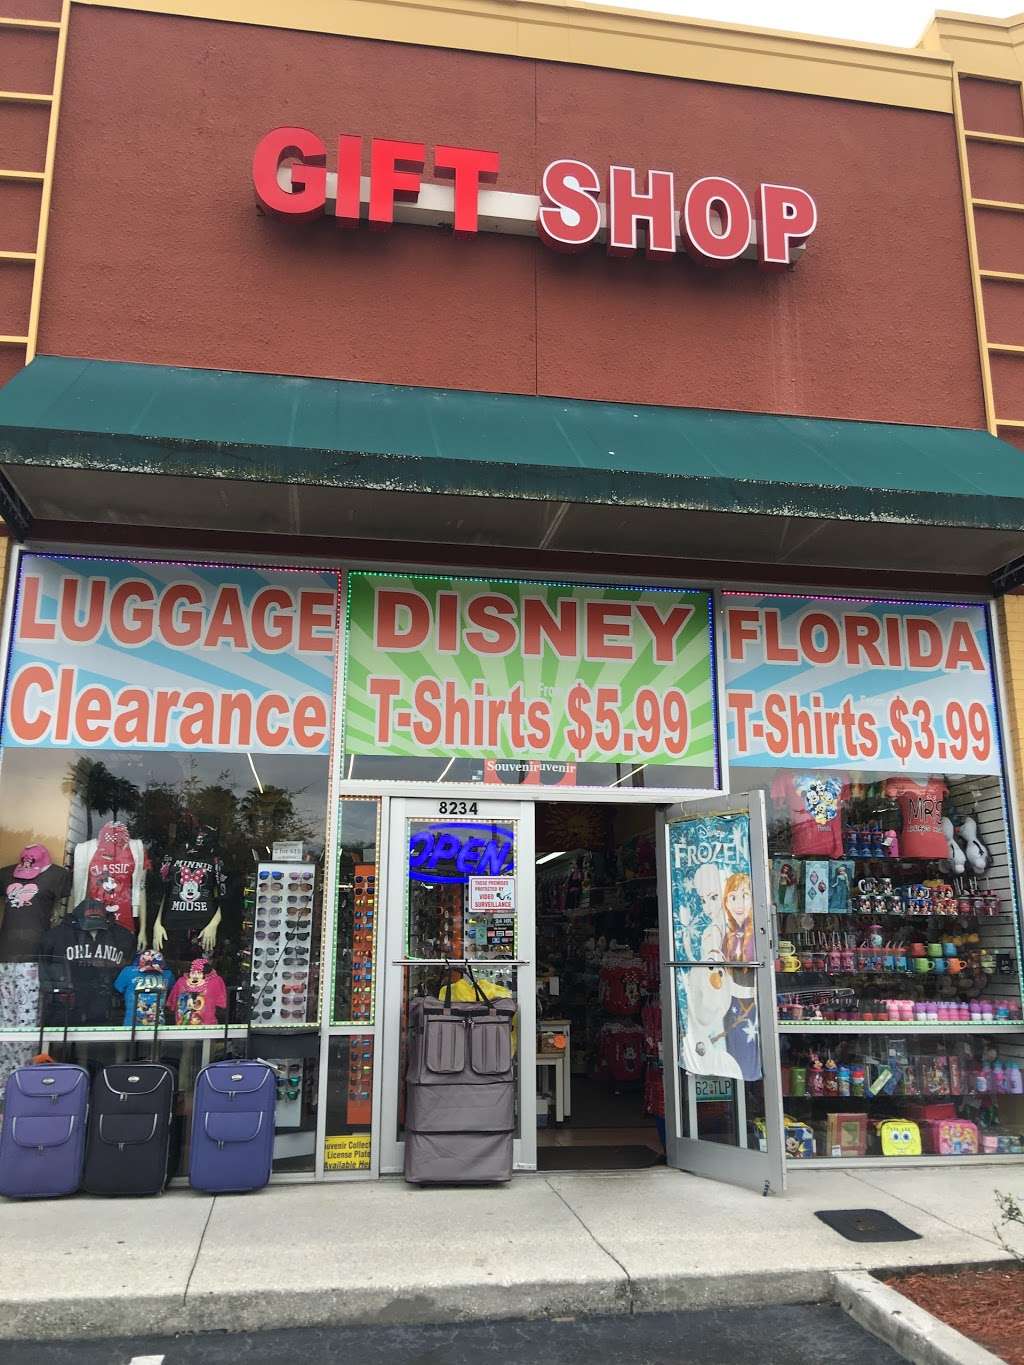 Gifts for less | 8234 World Center Dr, Orlando, FL 32821 | Phone: (407) 239-1888